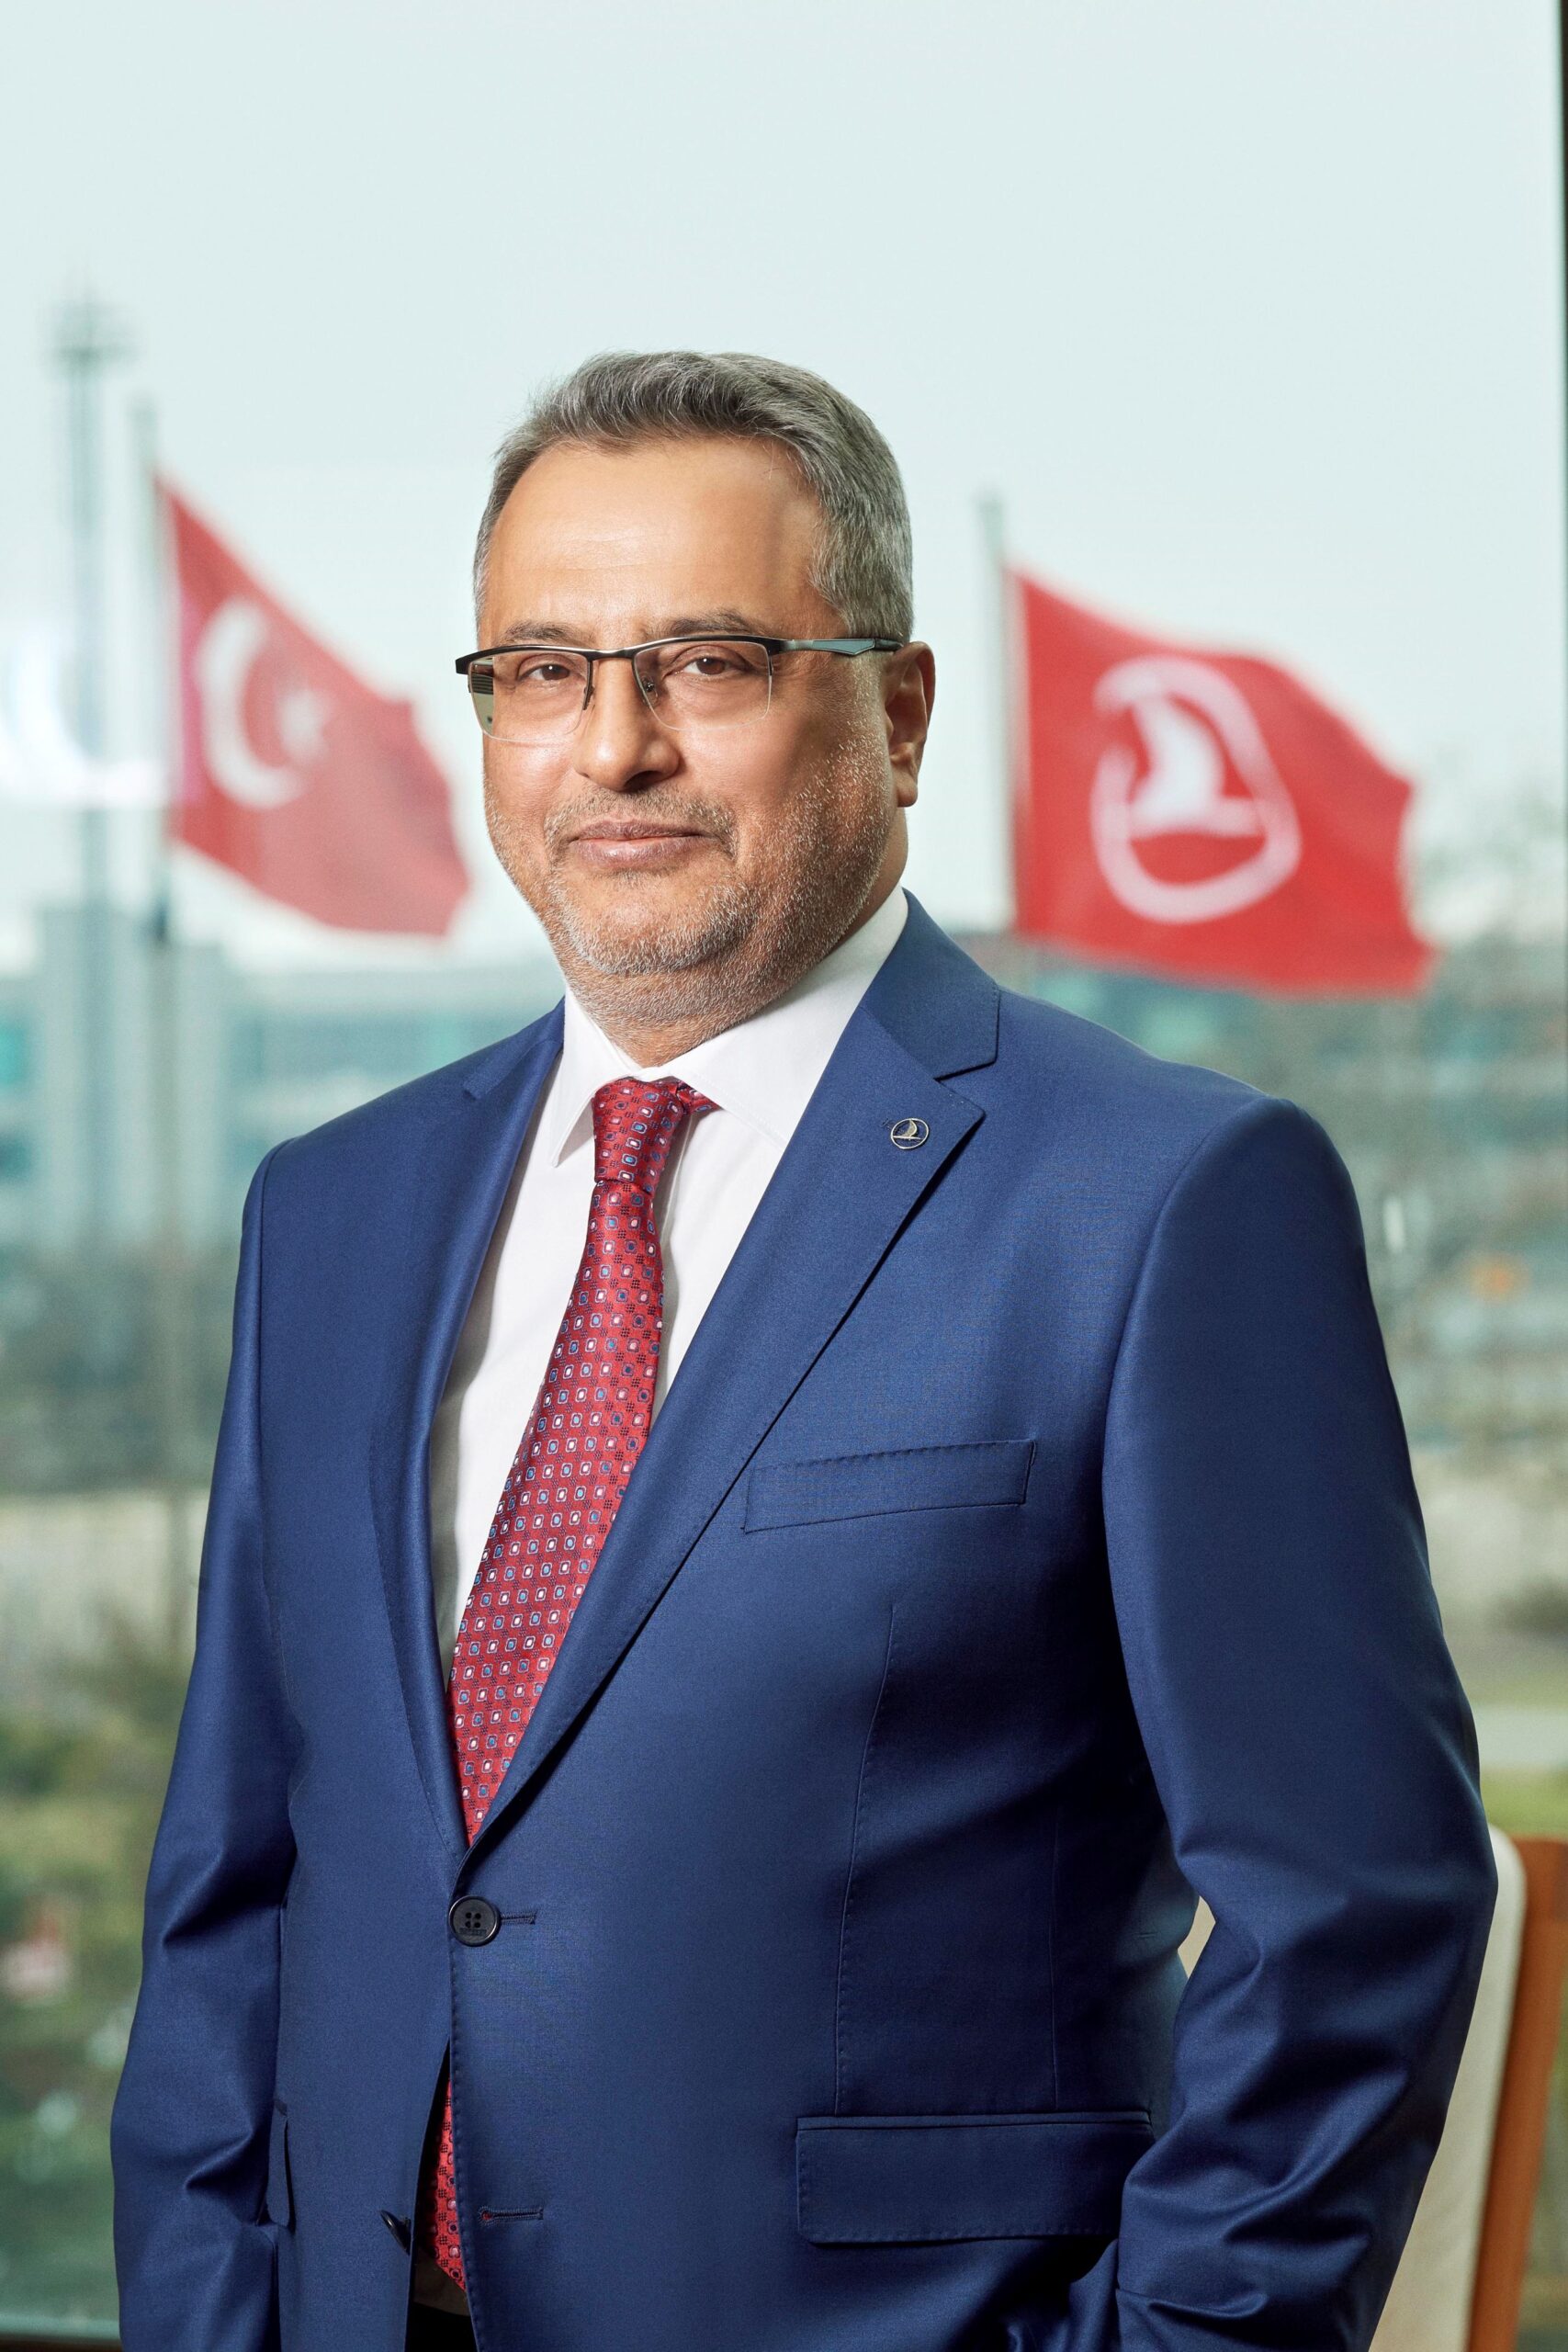 Turkish Airlines Chairman of the Board and Executive Committee, Prof. Ahmet Bolat